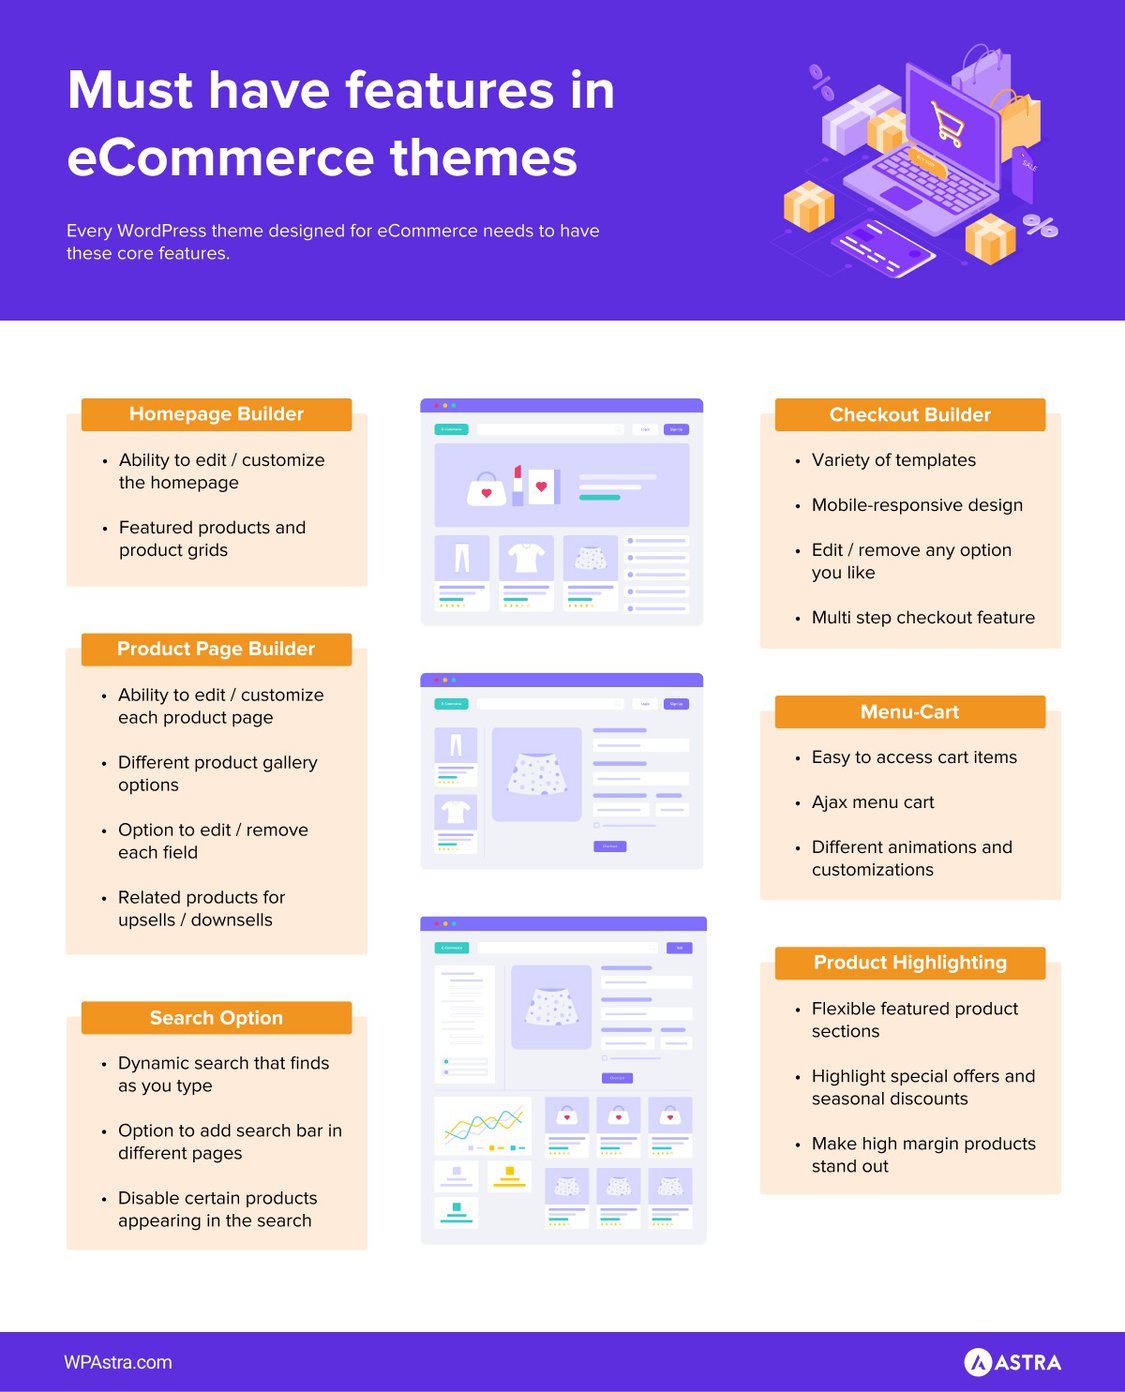 eCommerce theme features